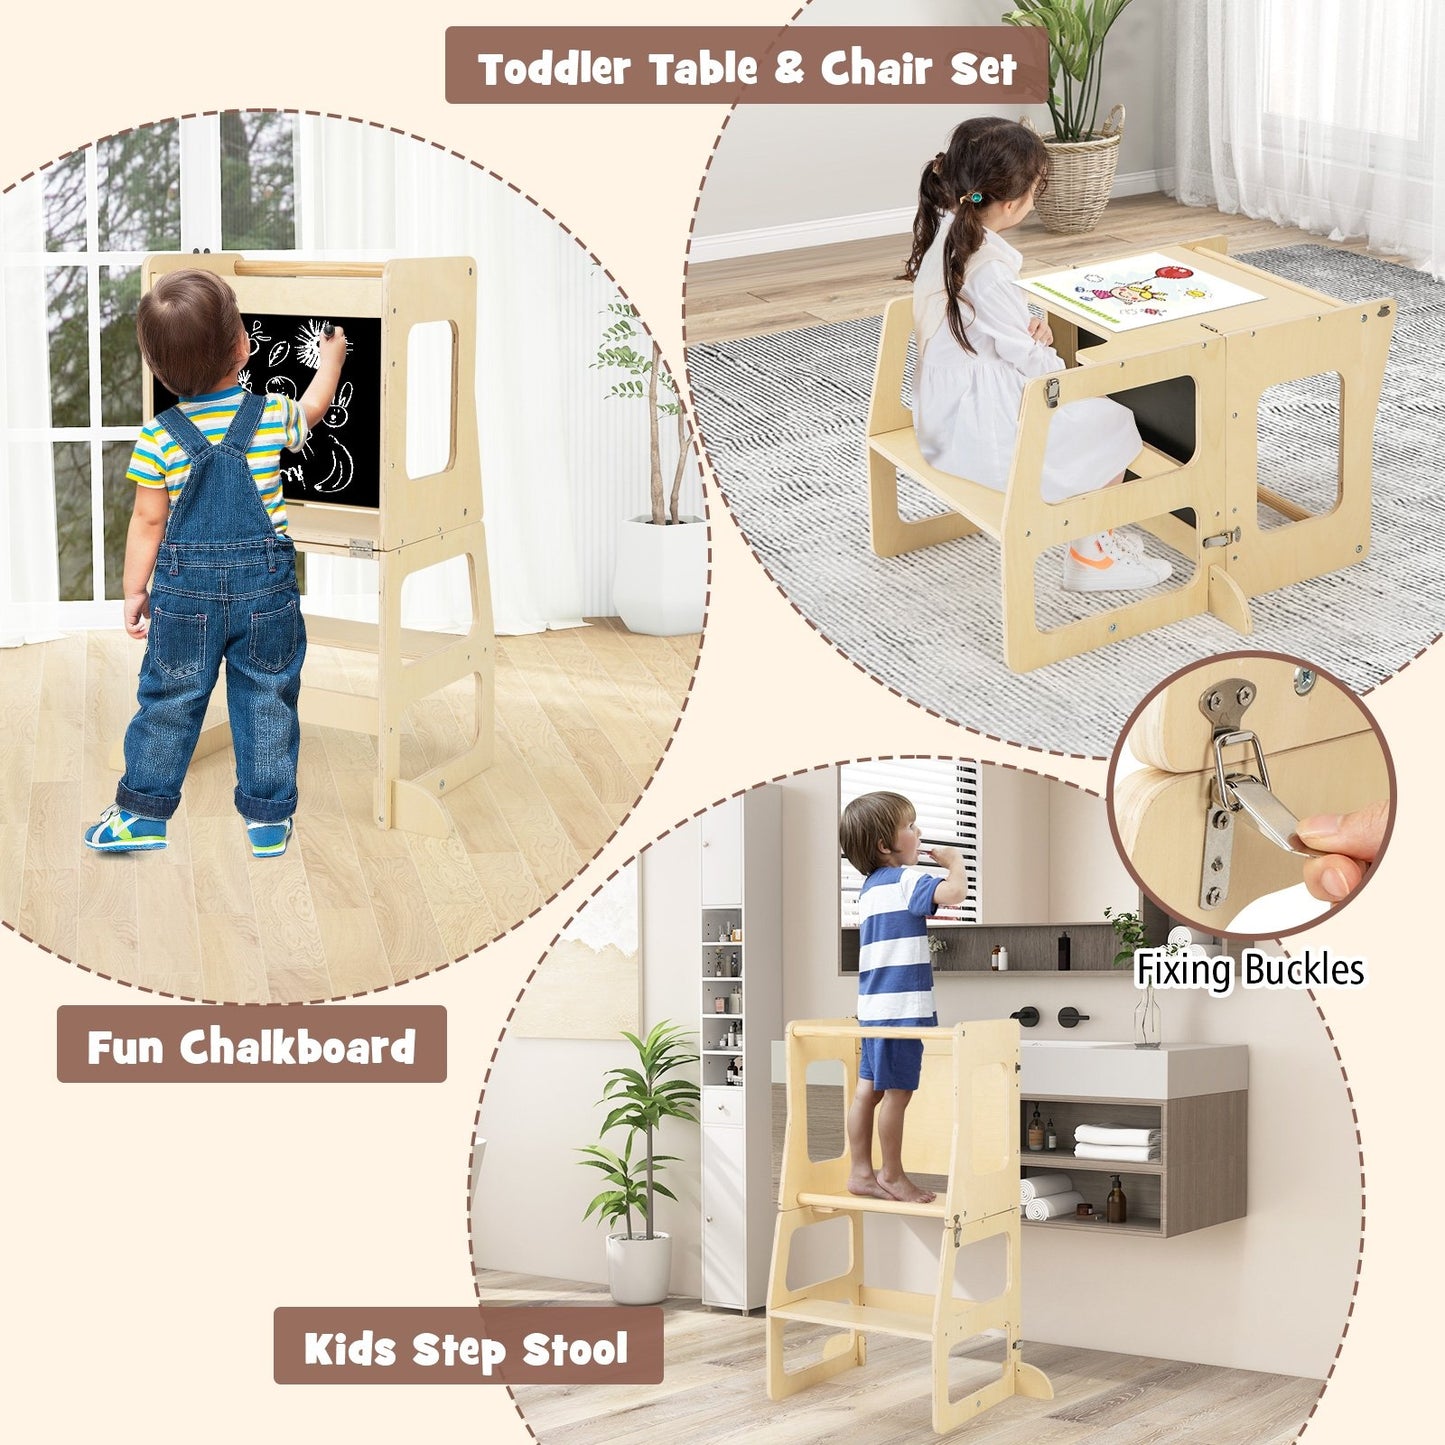 7-in-1 Toddler Climbing Toy Connected Table and Chair Set for Boys and Girls Aged 3-14 Years Old, Multicolor